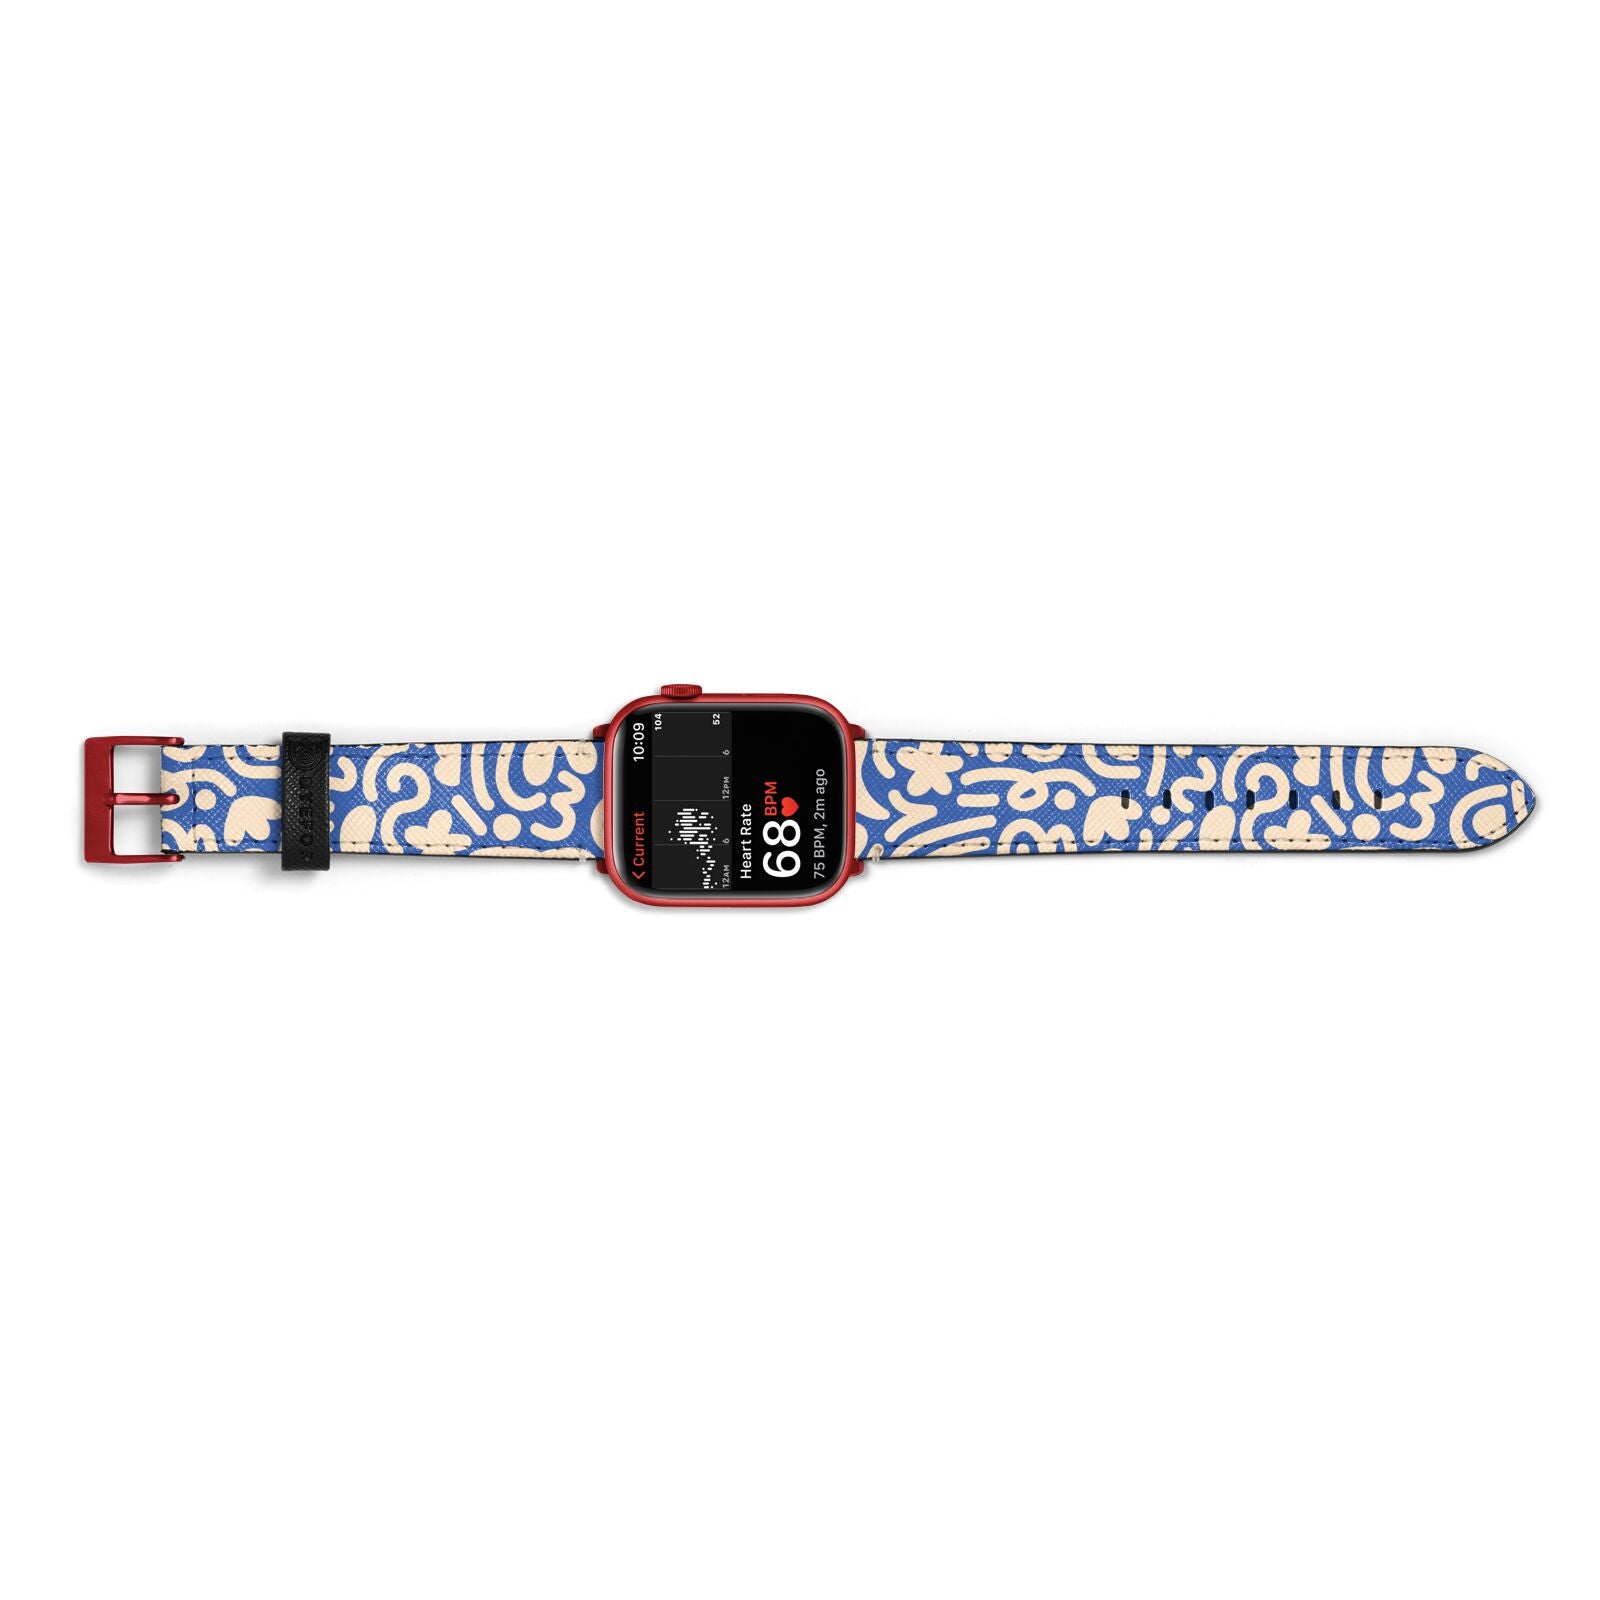 Abstract Apple Watch Strap Size 38mm Landscape Image Red Hardware